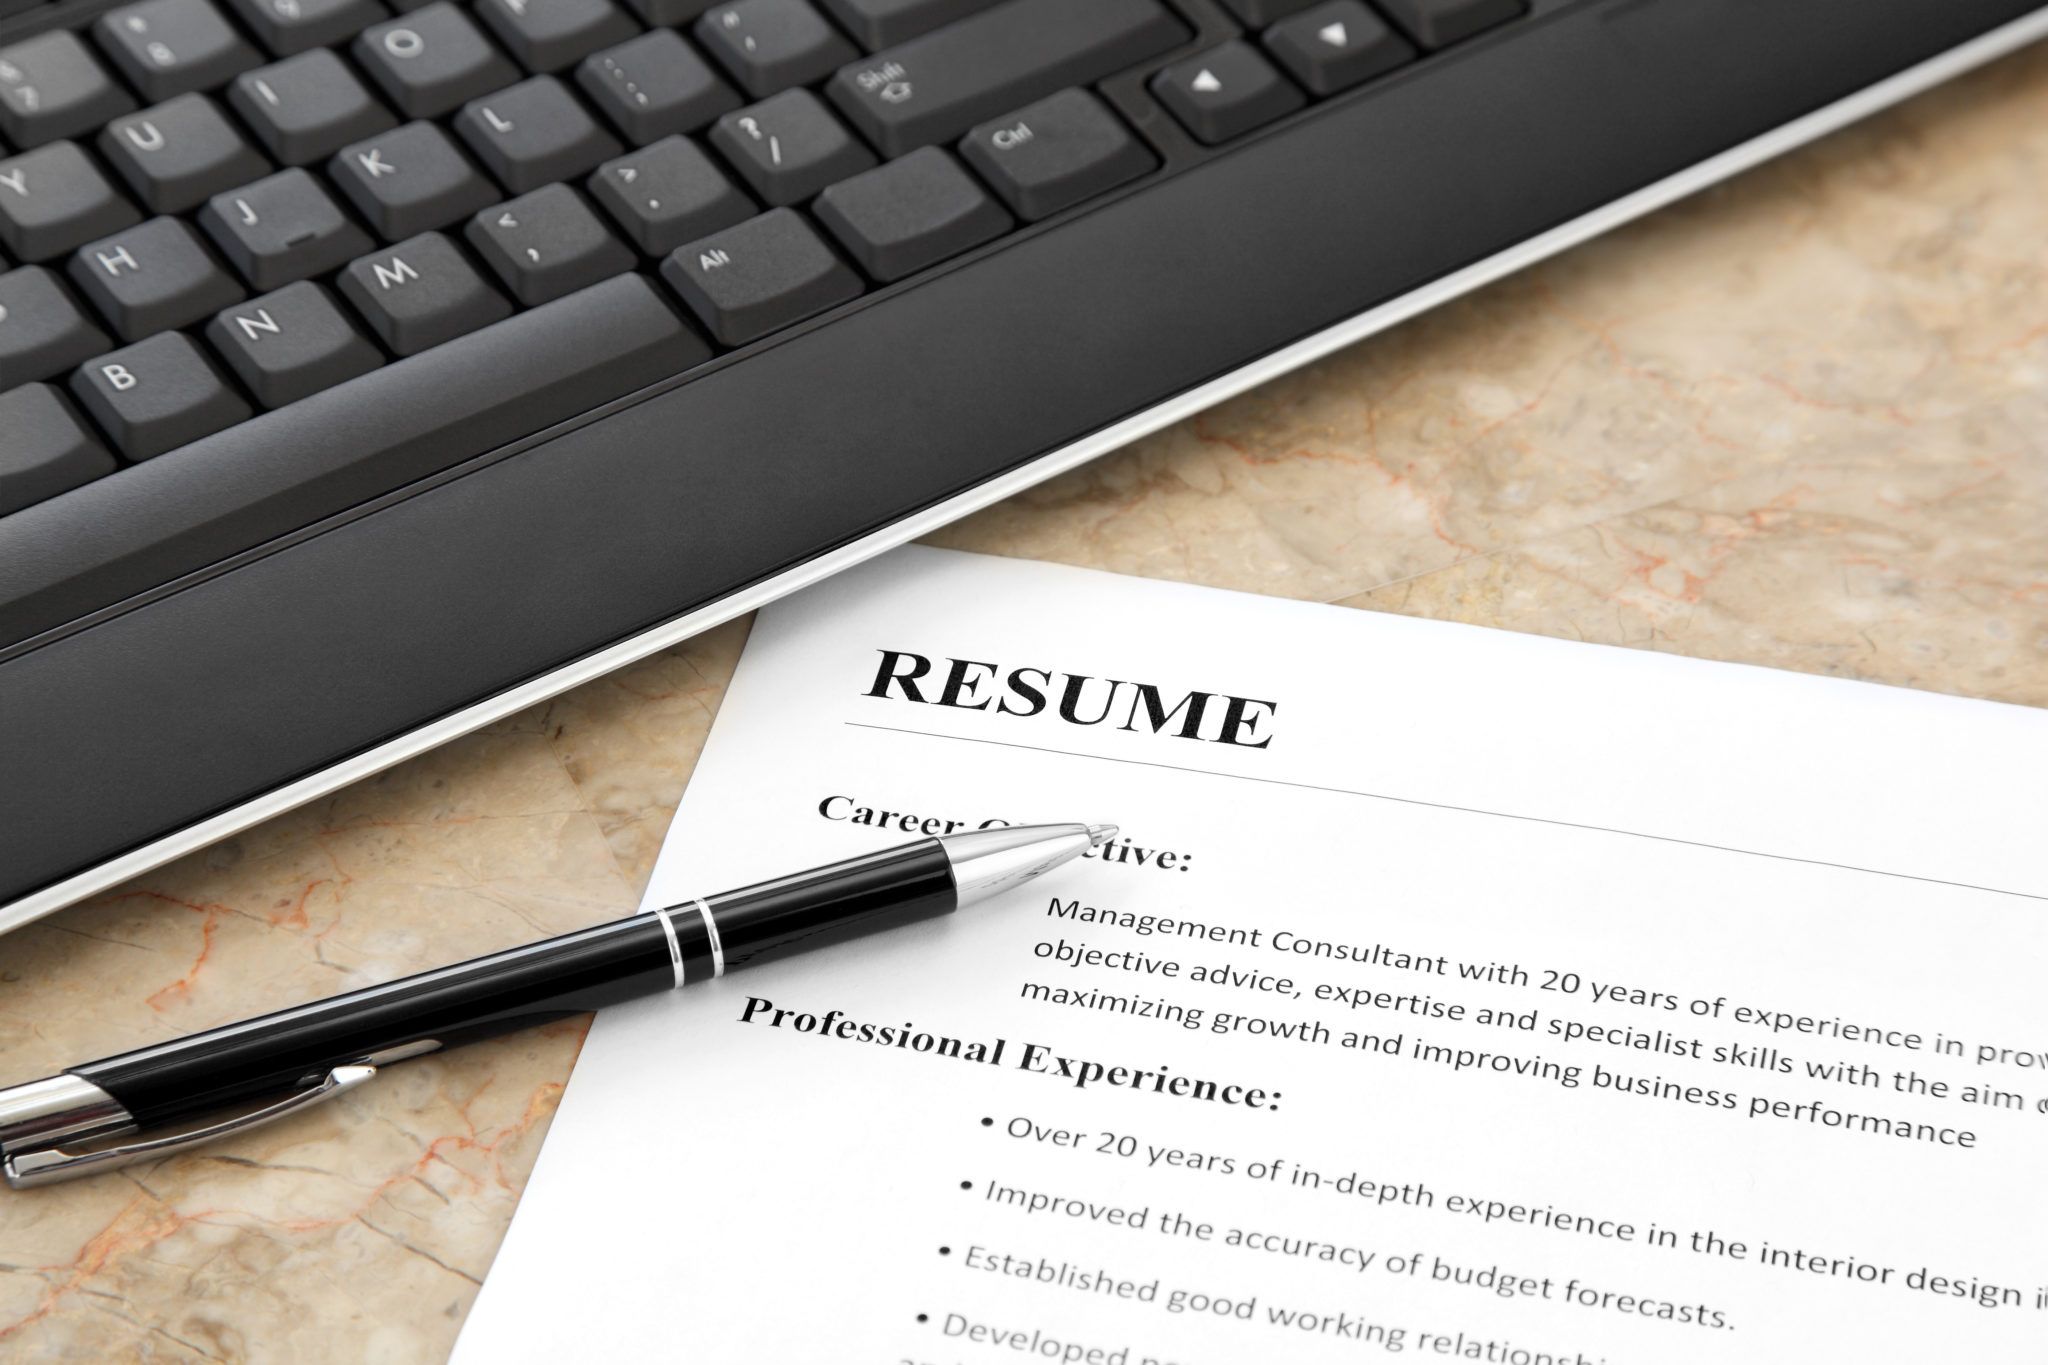  Breaking down the creation of a CV into distinct steps